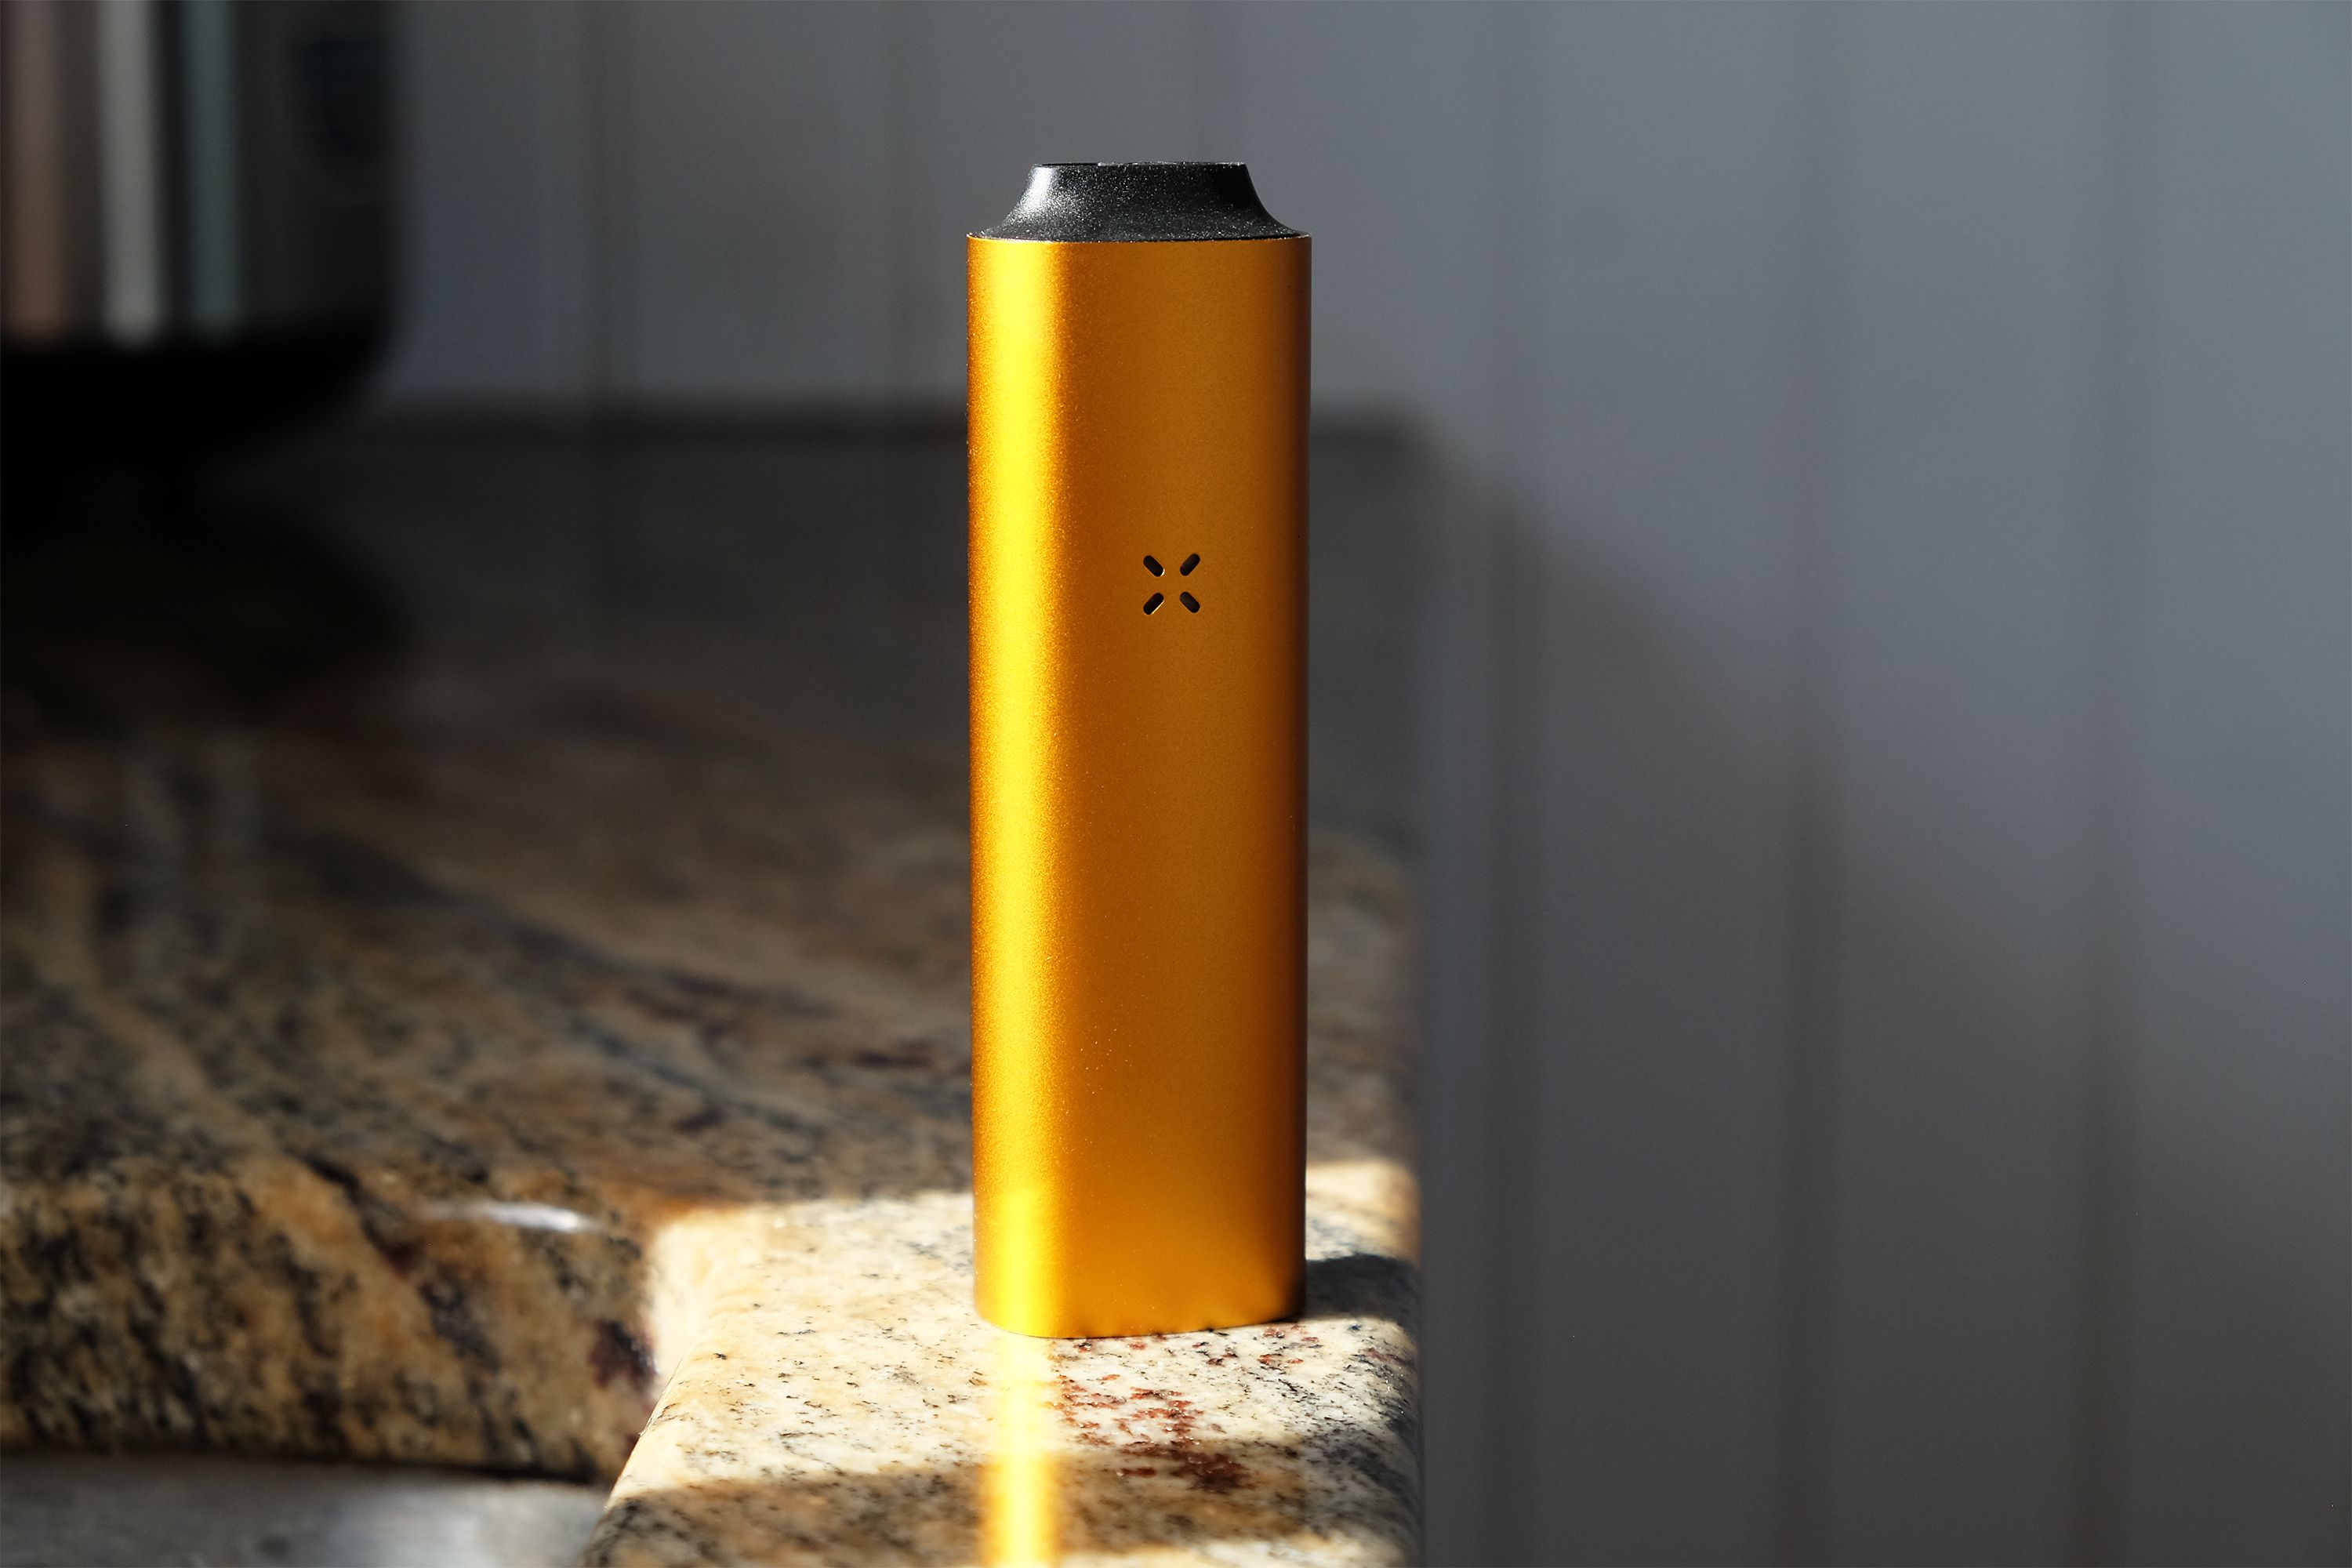 Pax 3 Vaporizer Review: Still the Best Weed Vape You Can Buy